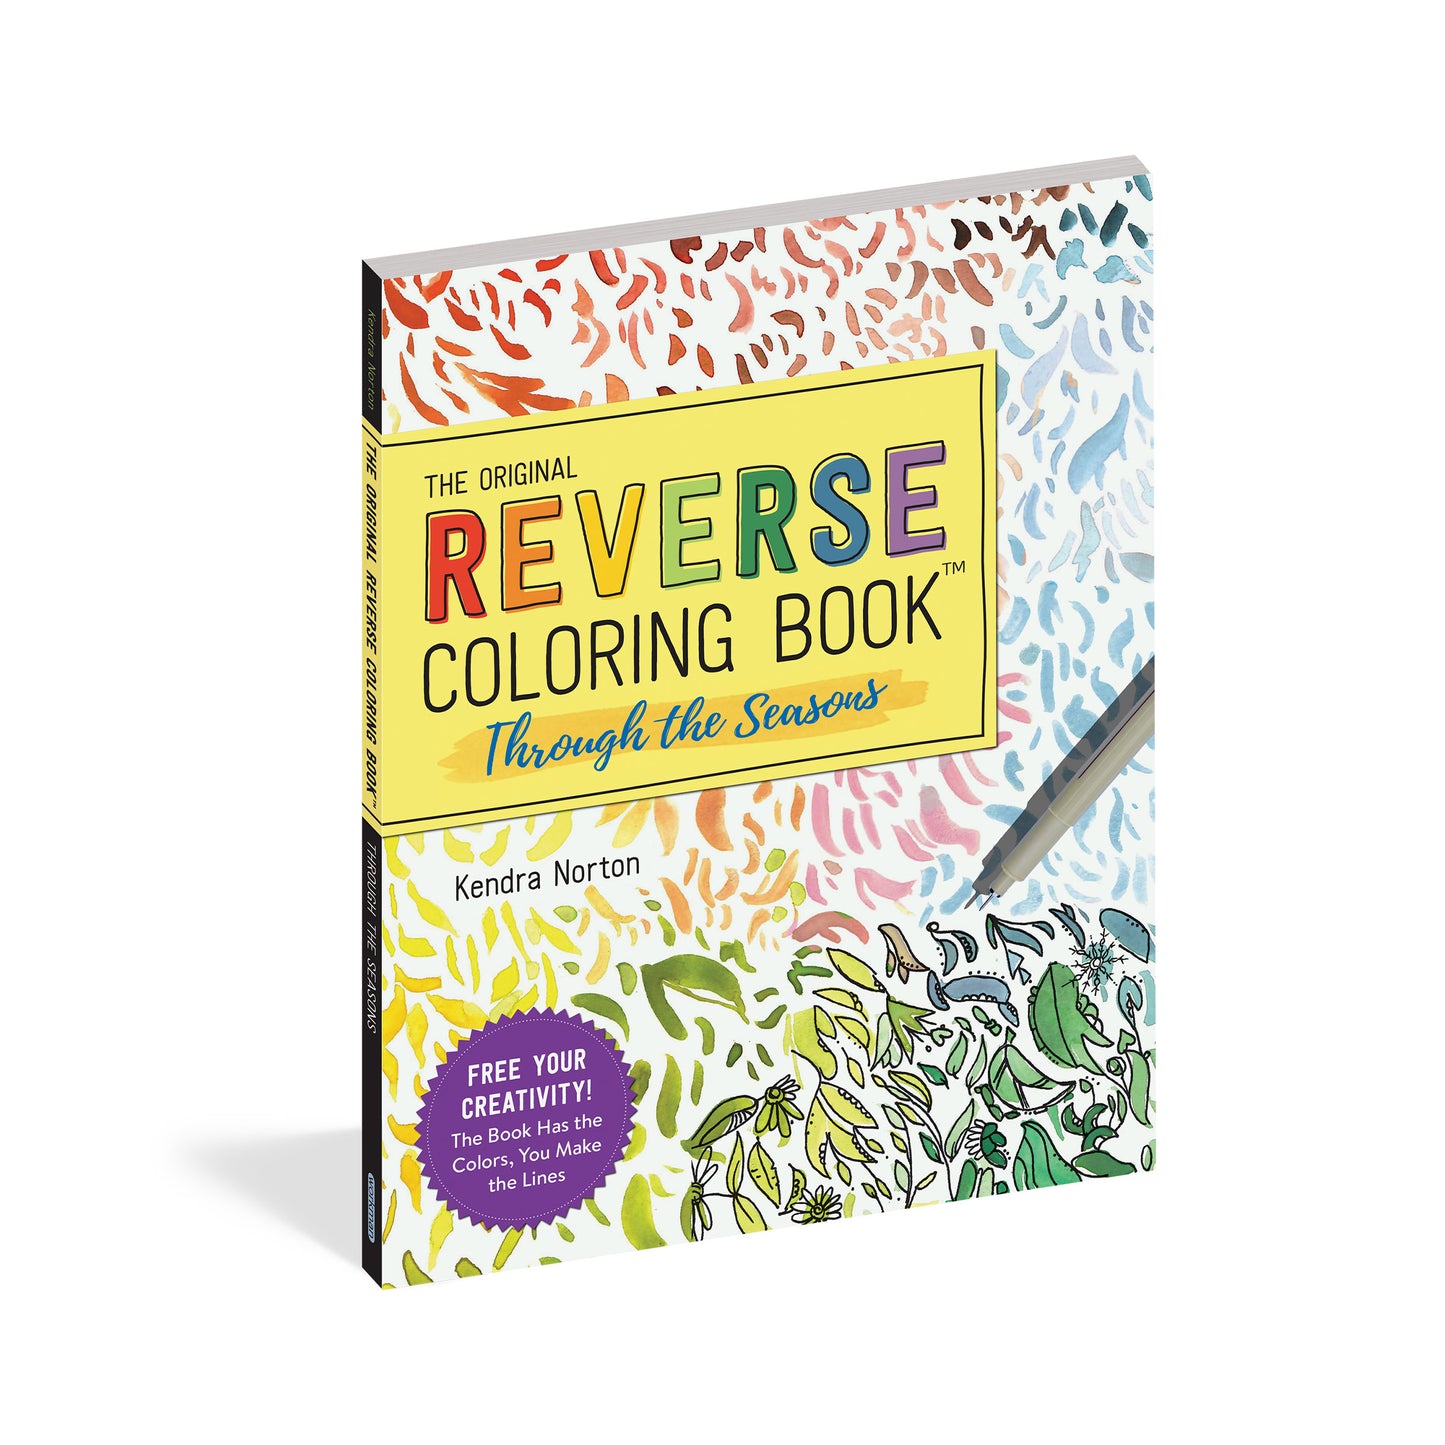 The Reverse Coloring Book: Through the Seasons